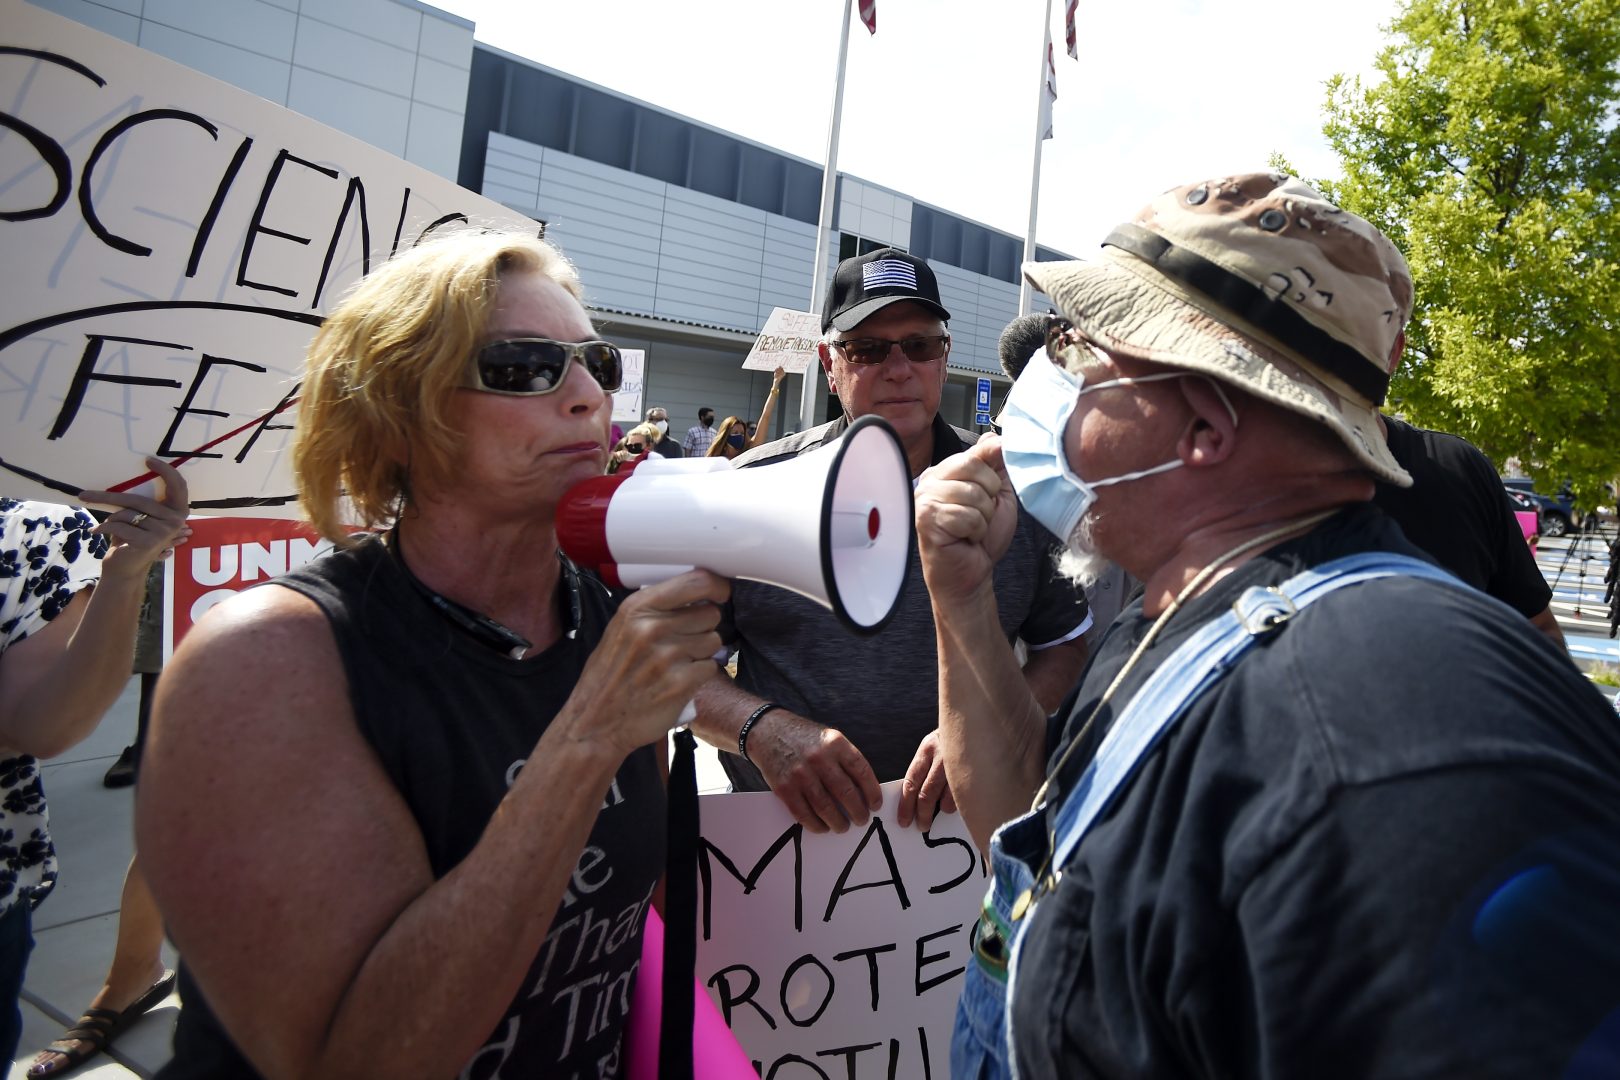 A pro-mask demonstrator, right, speaks with a non-mask demonstrator, left at the Cobb County School Board Headquarters during a pro mask wearing protest, Thursday, Aug. 12, 2021, in Marietta, Ga. Many school districts nationwide have seen parents protesting for and against masks.